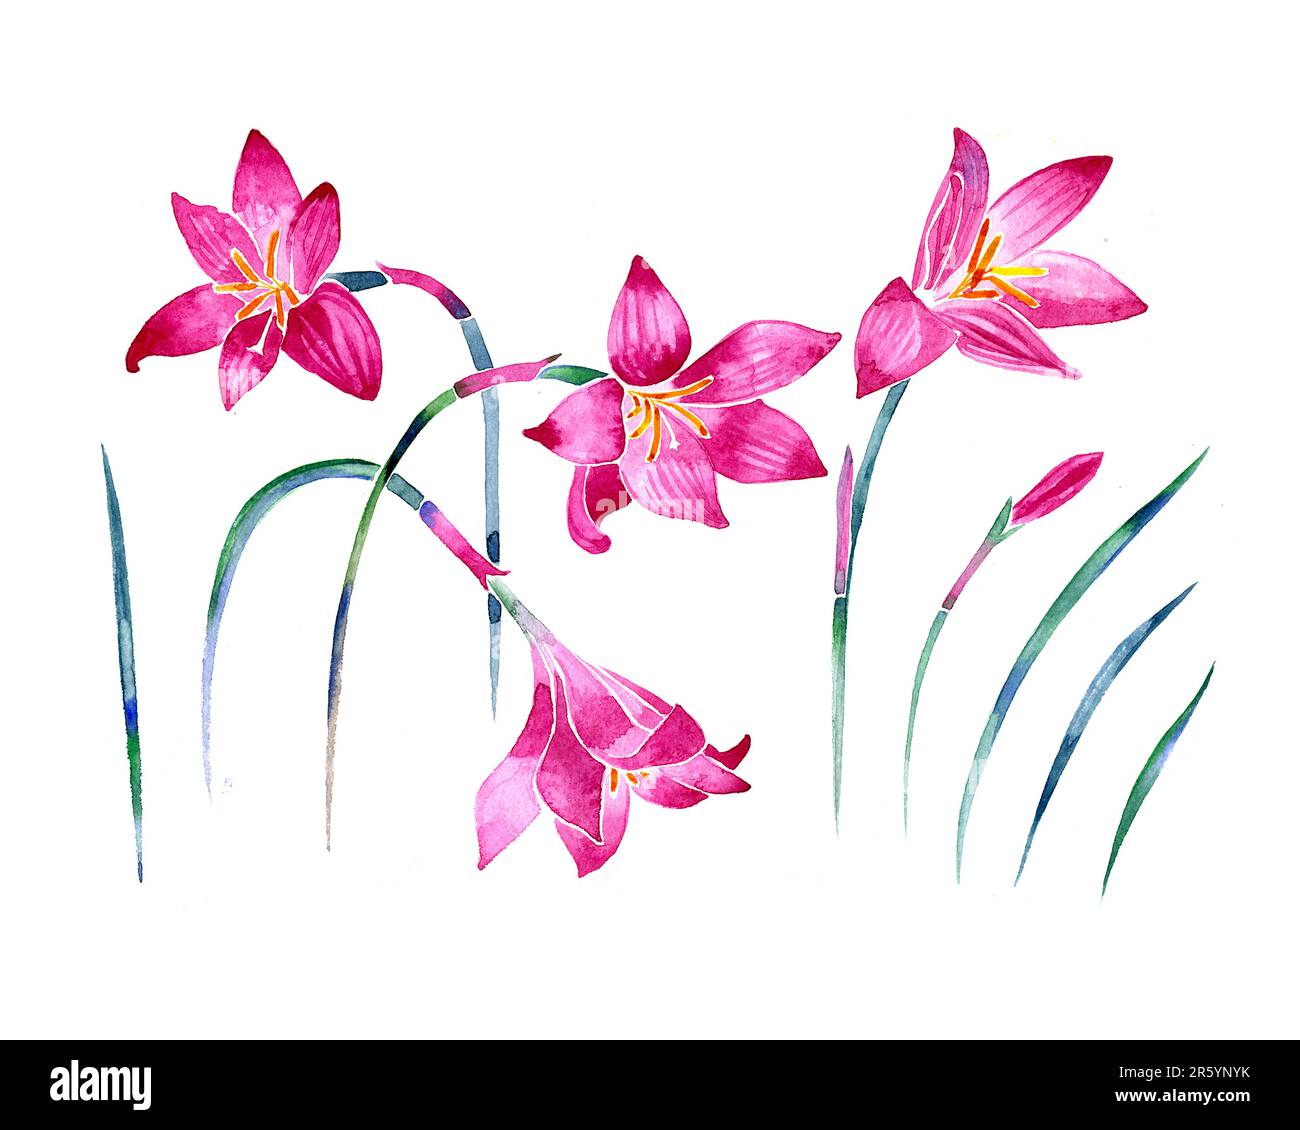 Watercolor Zephyranthes isolated illustration on a white background Stock Photo